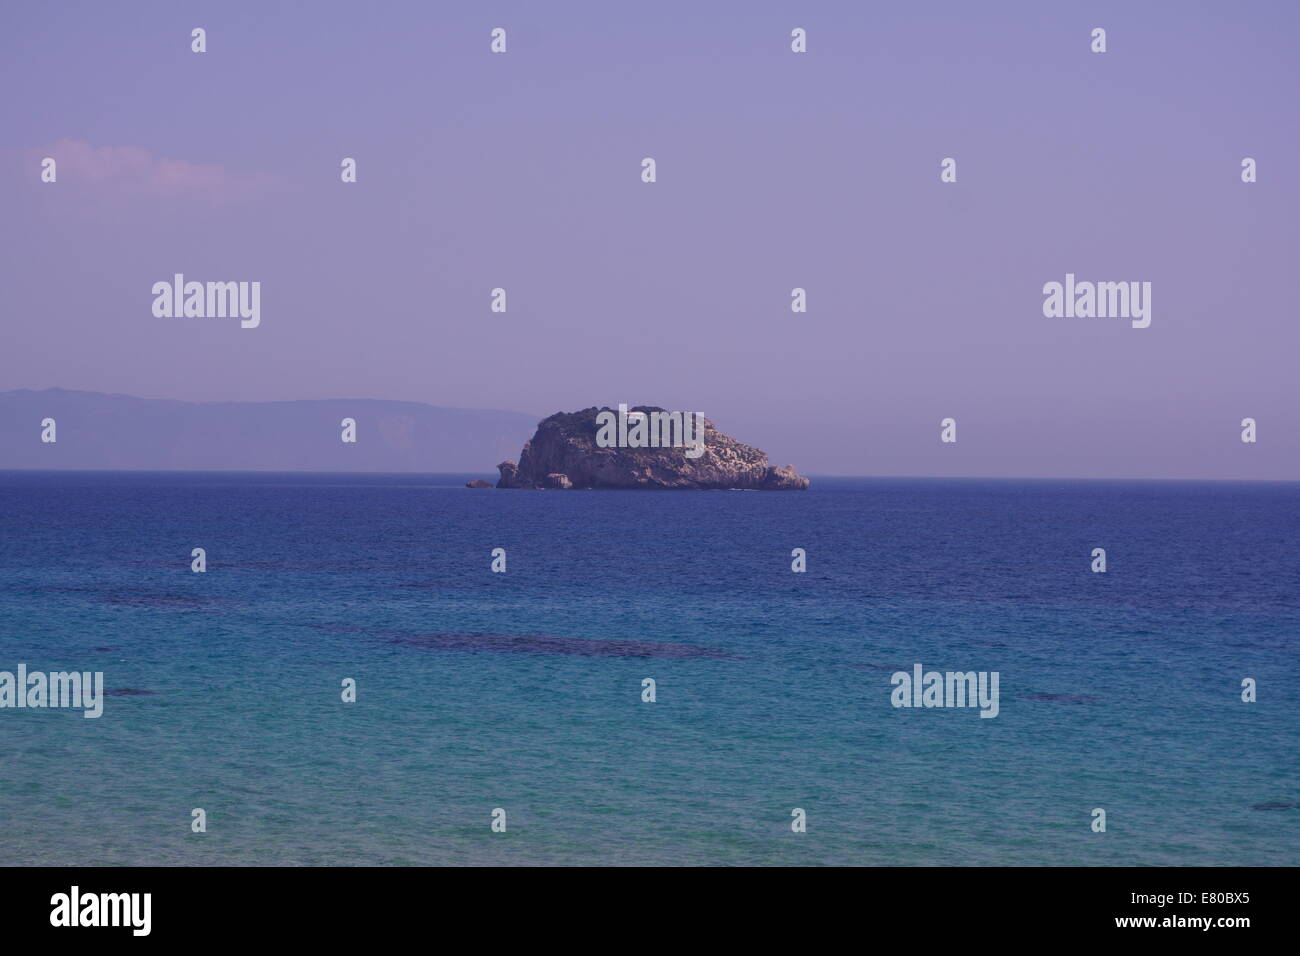 Island getaway, secluded, remote house, private island? Stock Photo